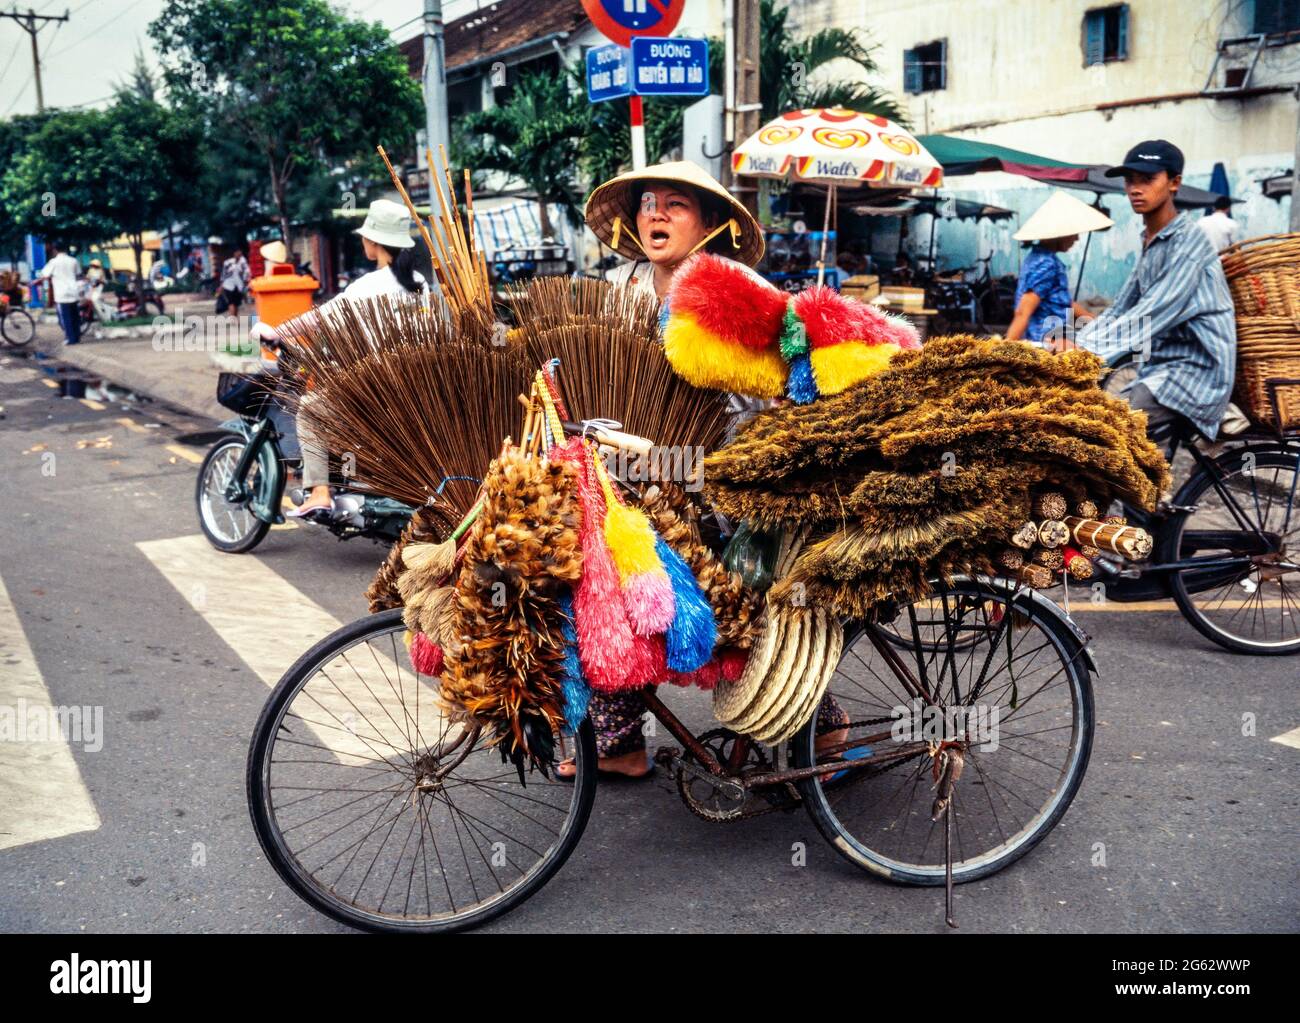 Street hawker selling brushes from a bicycle, Saigon, Ho Chi Minh city, Vietnam Stock Photo